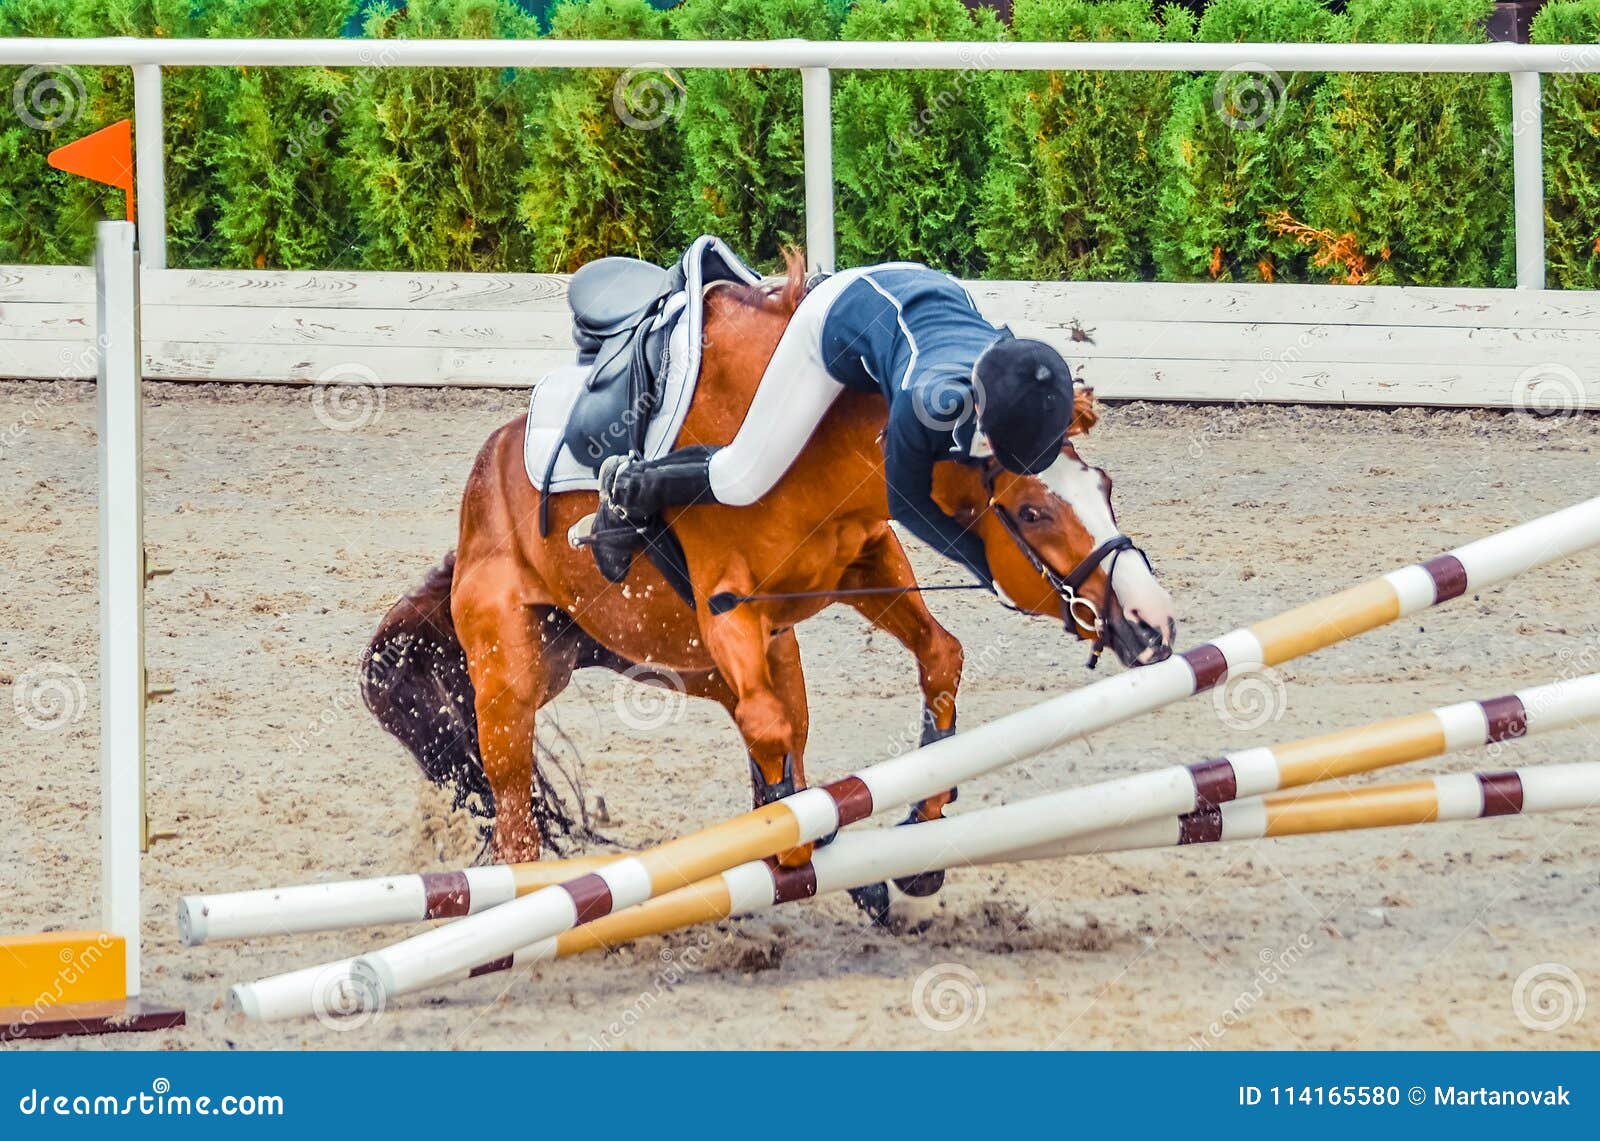 young rider falling from horse during a competition. horse show jumping accident.